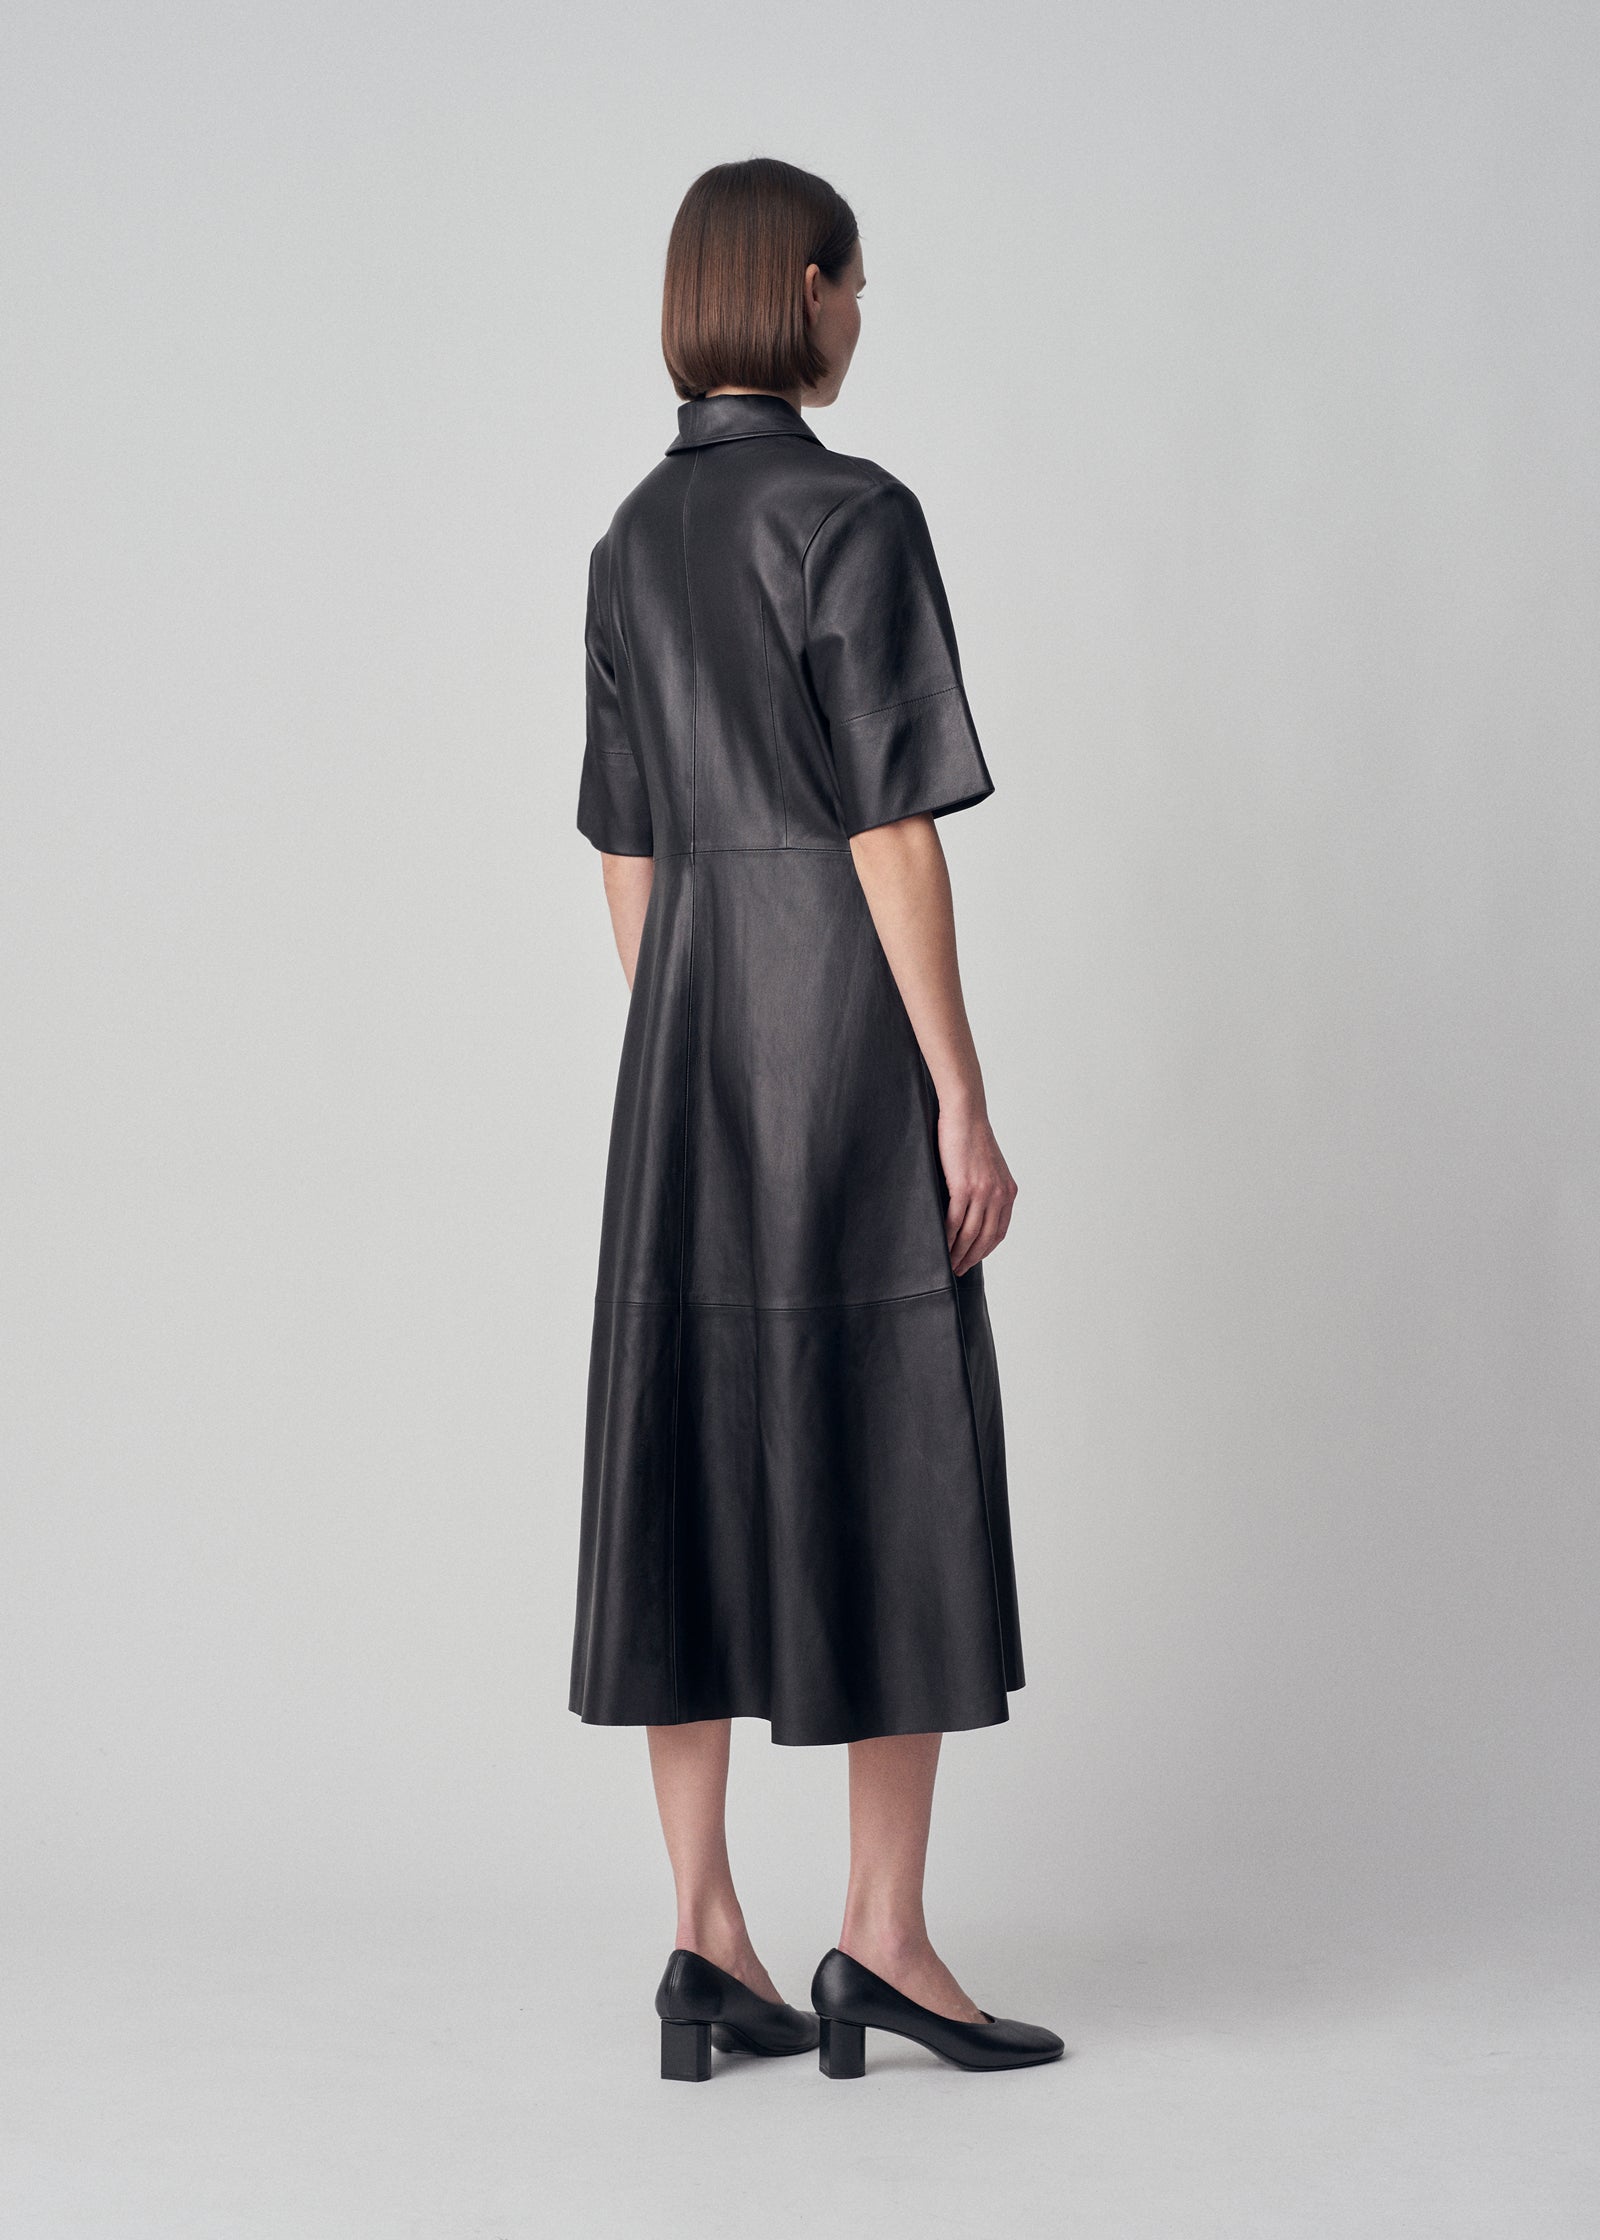 Placket Dress in Leather - Black - CO Collections